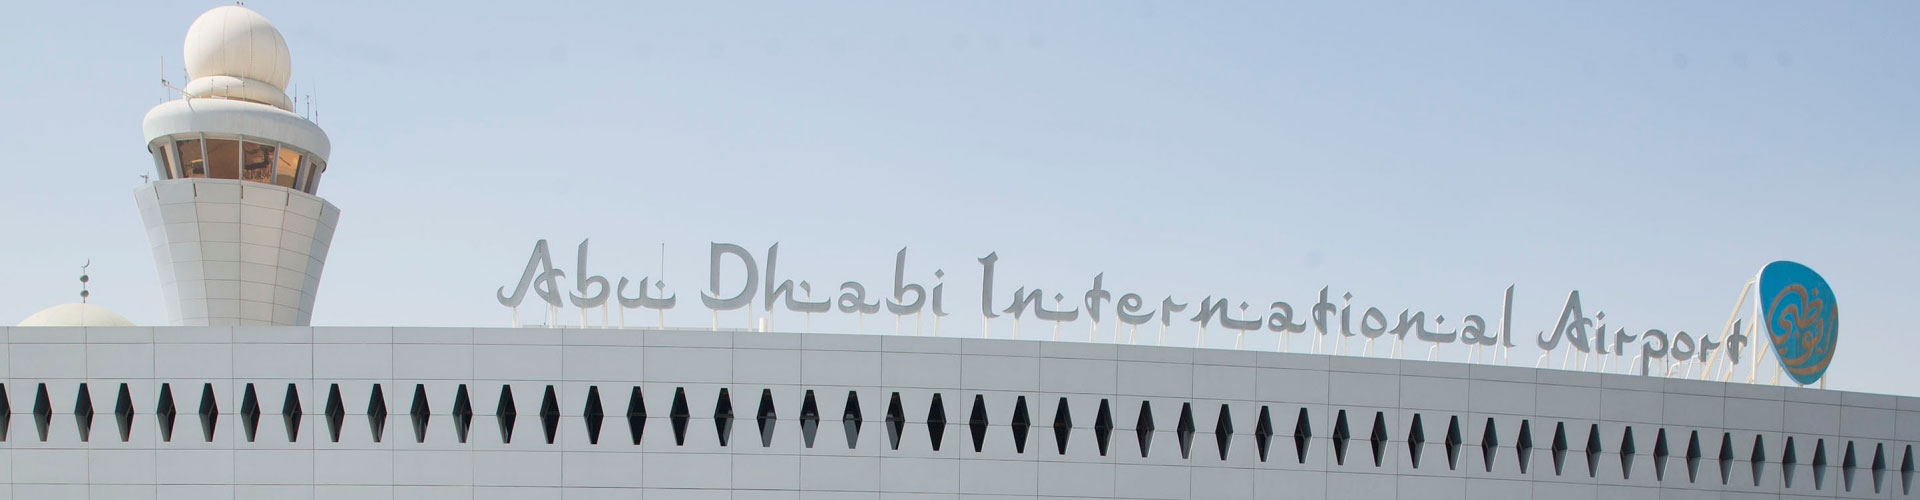 Abu Dhabi International Airport, UAE's busiest, served 21 million passengers in 2017. Located near the city, it's a hub for Emirates and Etihad. Terminal 3 is the newest. It features duty-free shops, eateries, and a spa.